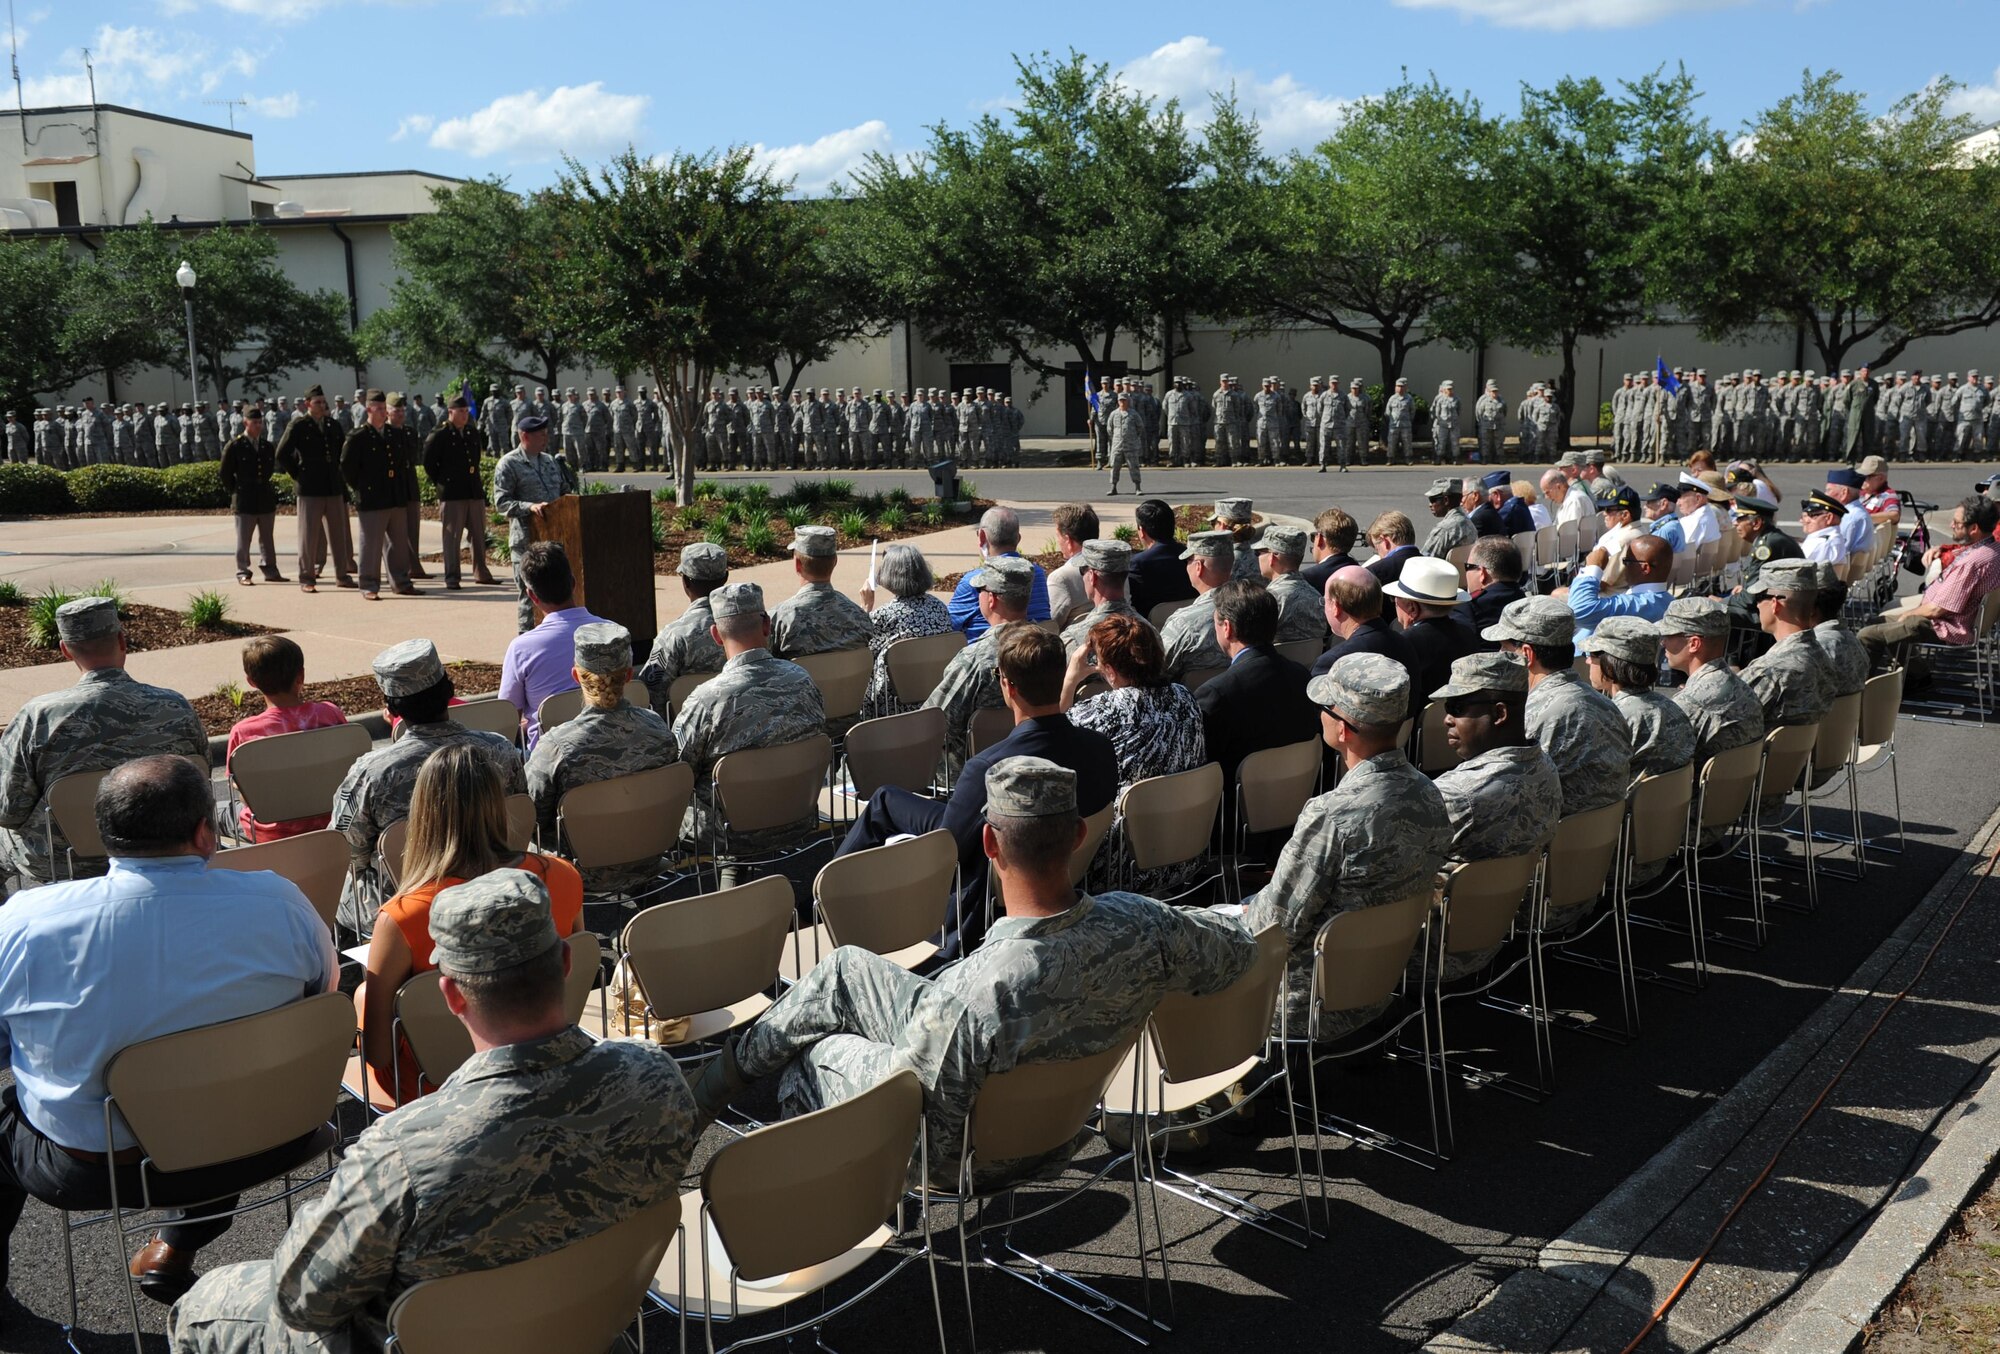 Master Sgt. Jeffery Thatcher, 81st Security Forces Squadron standardizations and evaluations superintendent, serves as the narrator during the Lt. Samuel Reeves Keesler, Jr. Memorial Retreat Ceremony May 13, 2016, Keesler Air Force Base, Miss. The event was held in honor of Lt. Keesler’s date of entry into the Army Air Service 99 years ago. The retreat ceremony is one part of a year-long celebration of Lt. Keesler, a Mississippi native and WORLD WAR I hero, and the 75th anniversary of the opening of the base. (U.S. Air Force photo by Kemberly Groue)